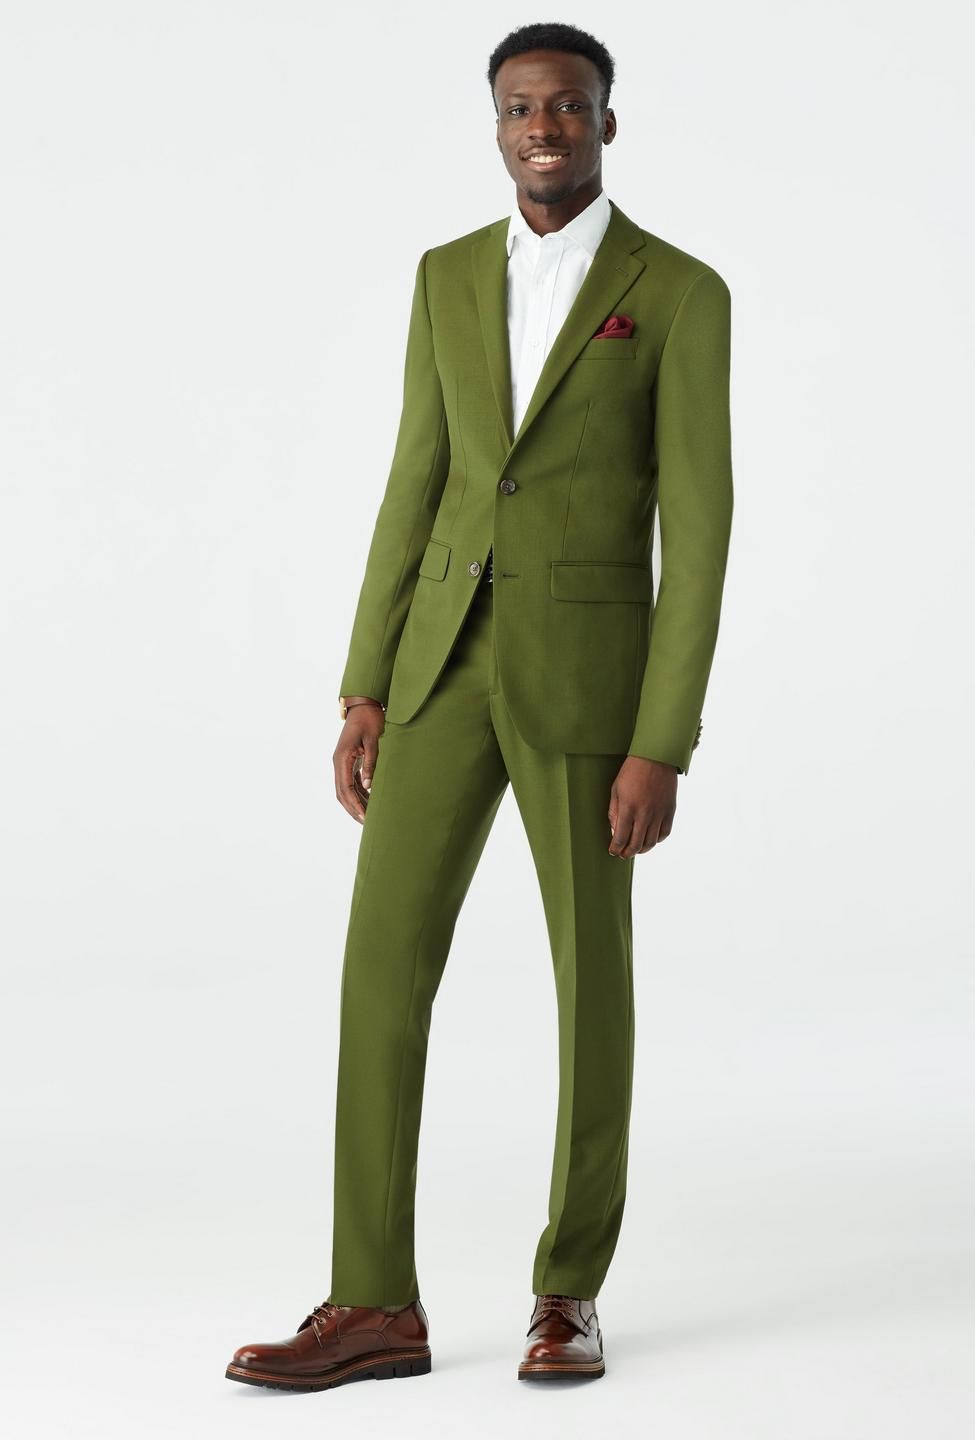 Custom Suits Made For You - Howell Wool Stretch Olive Suit | INDOCHINO | Indochino